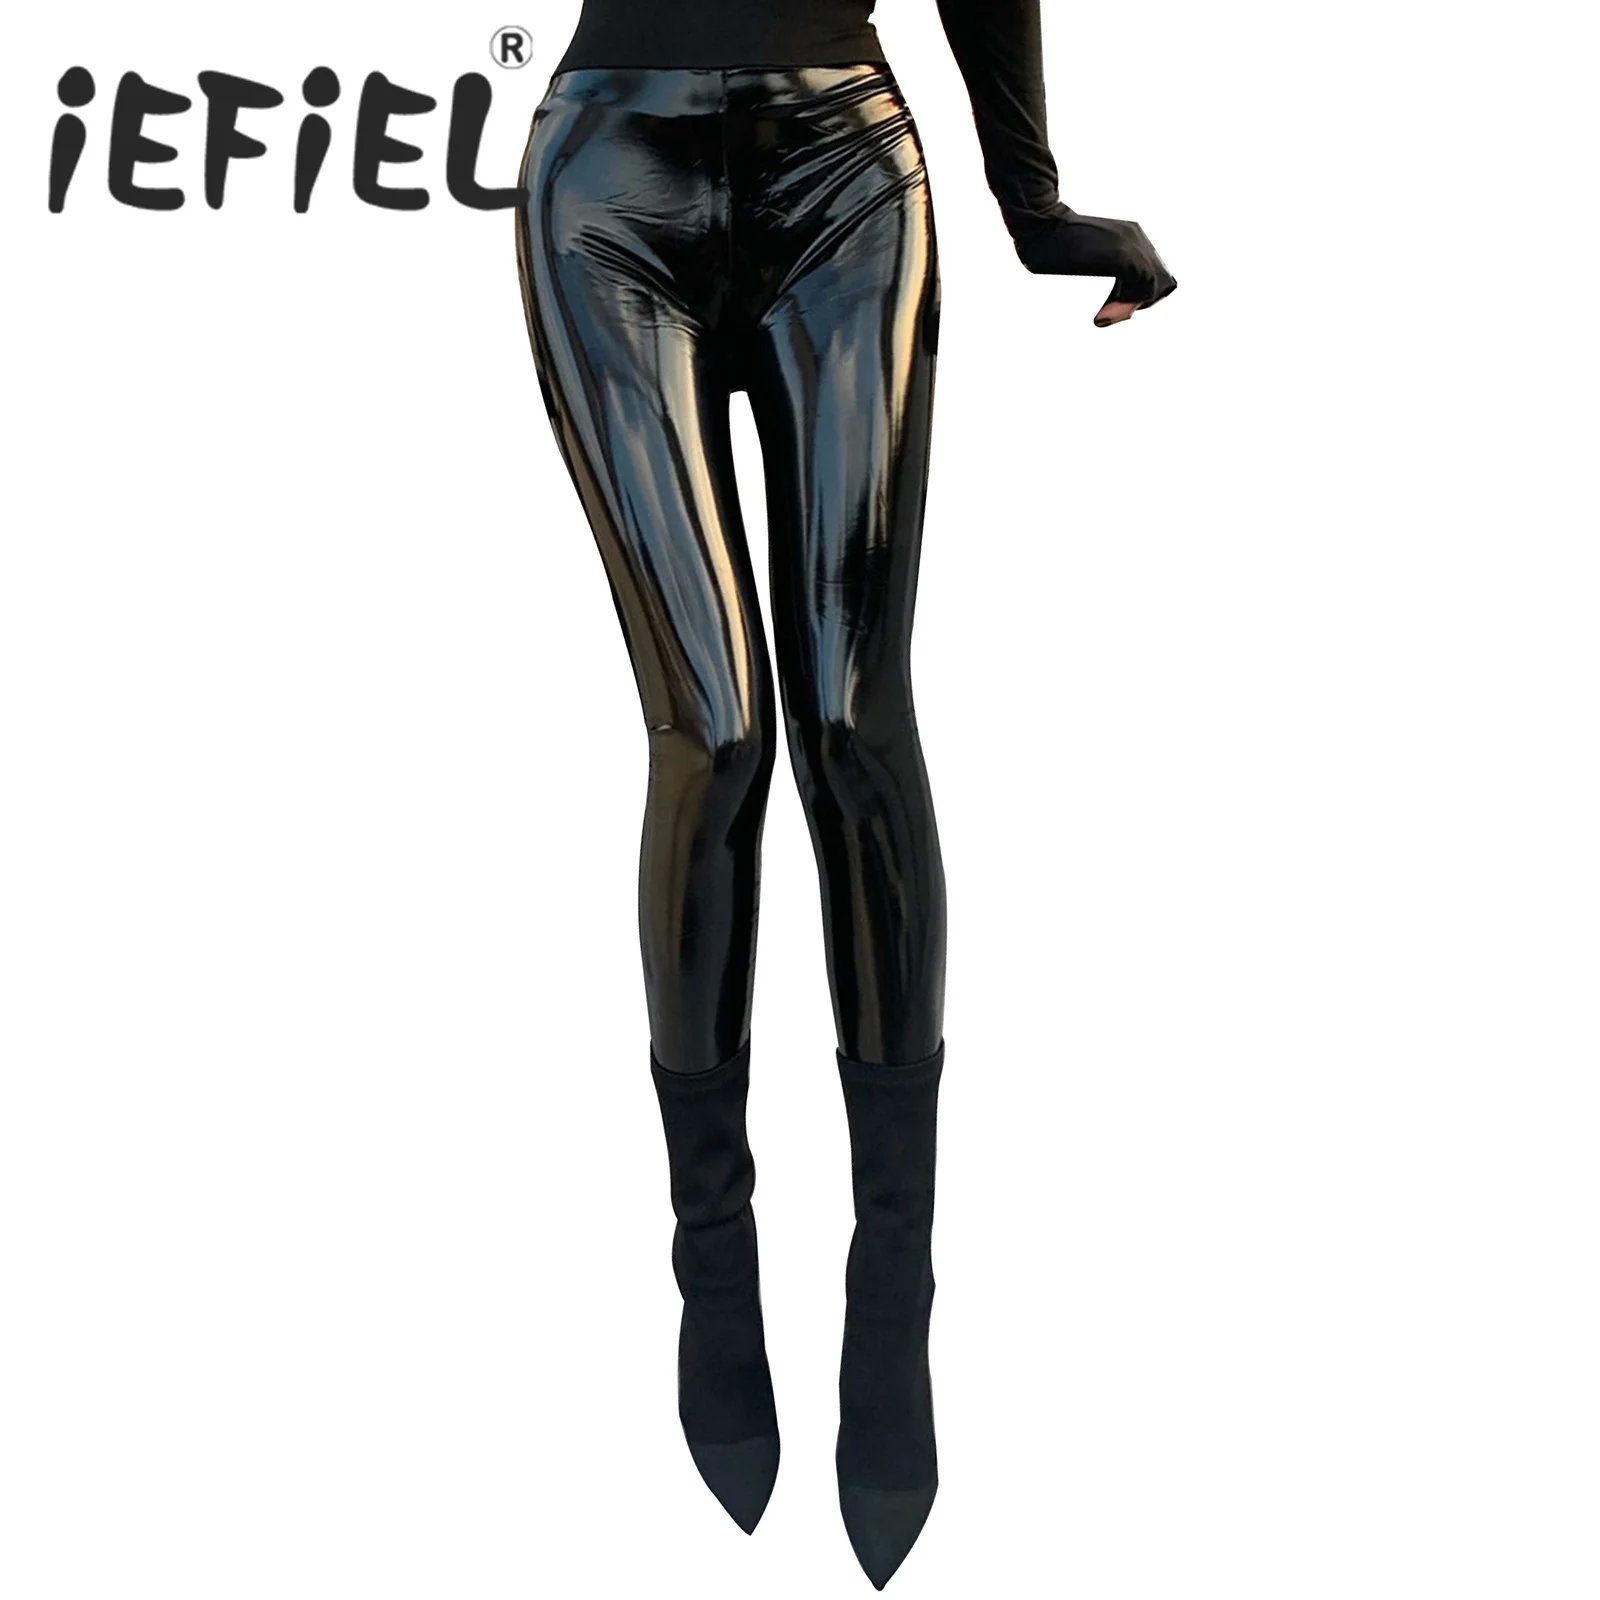 

Womens Wetlook Skinny Pants Fashion Patent Leather Glossy Pants Wet Look High Waist Stretchy Leggings Trousers Party Clubwear